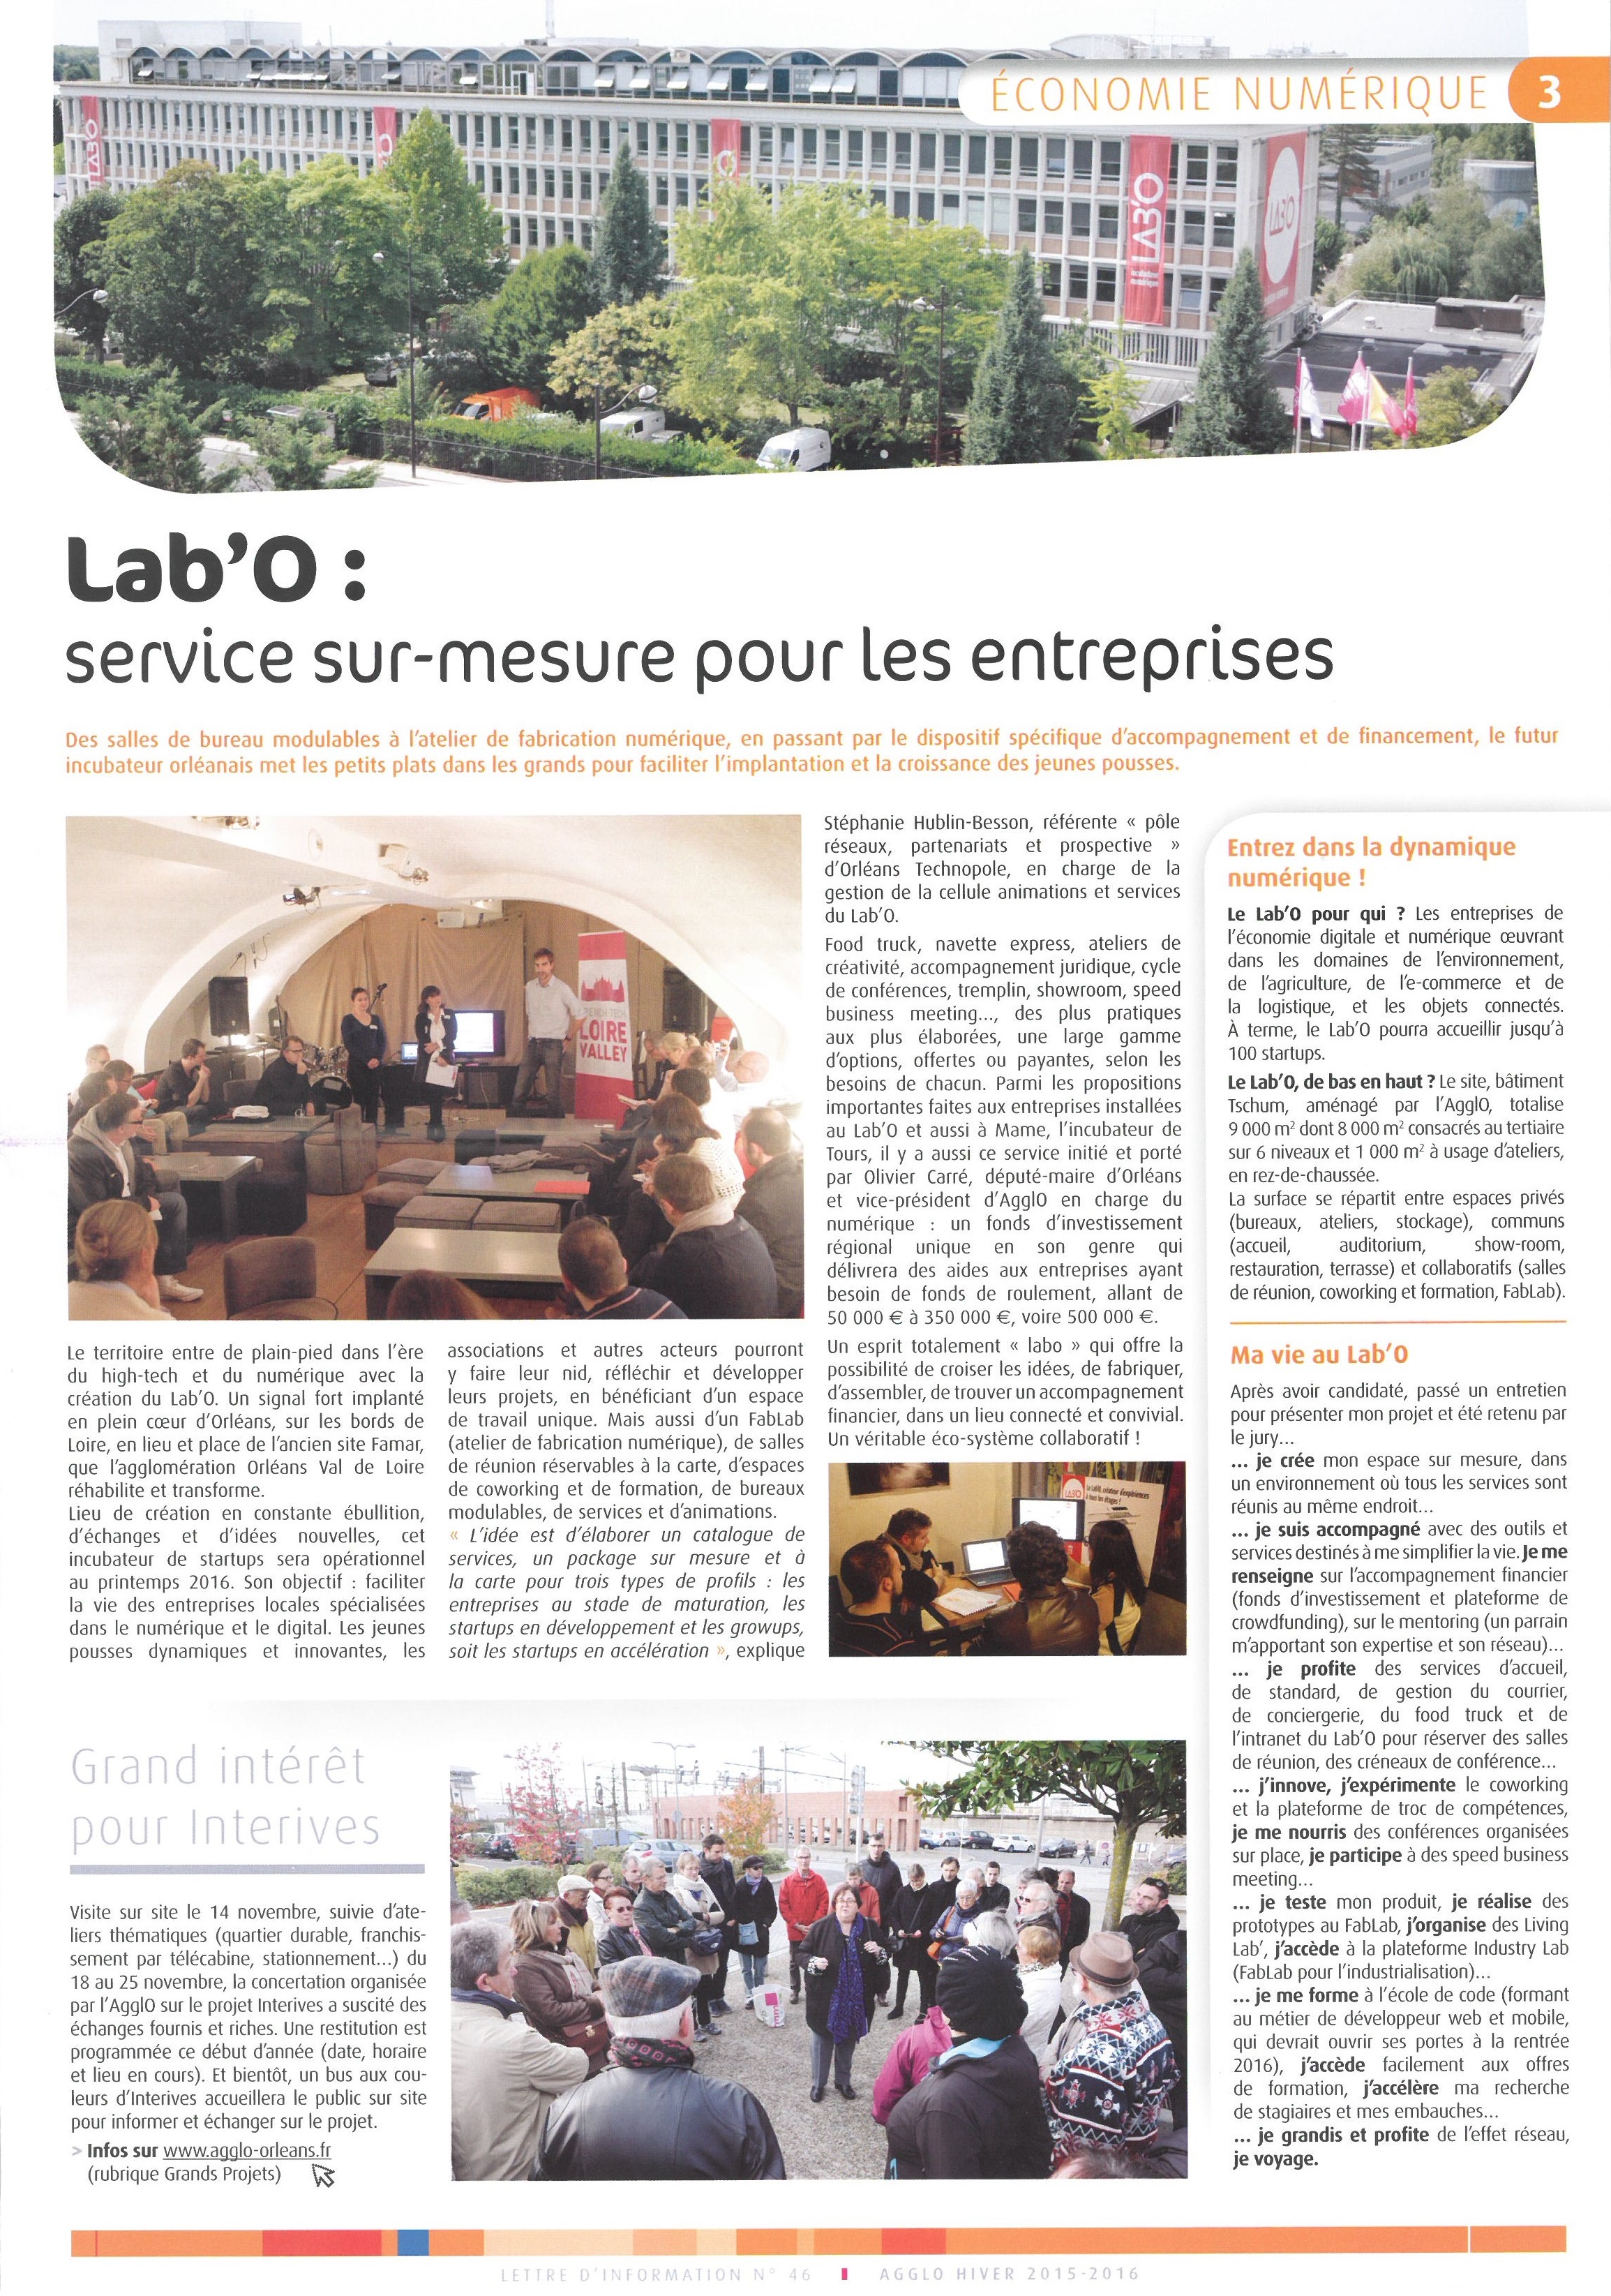 Lettre d'information n° 46 Agglo Hiver 2015-2016